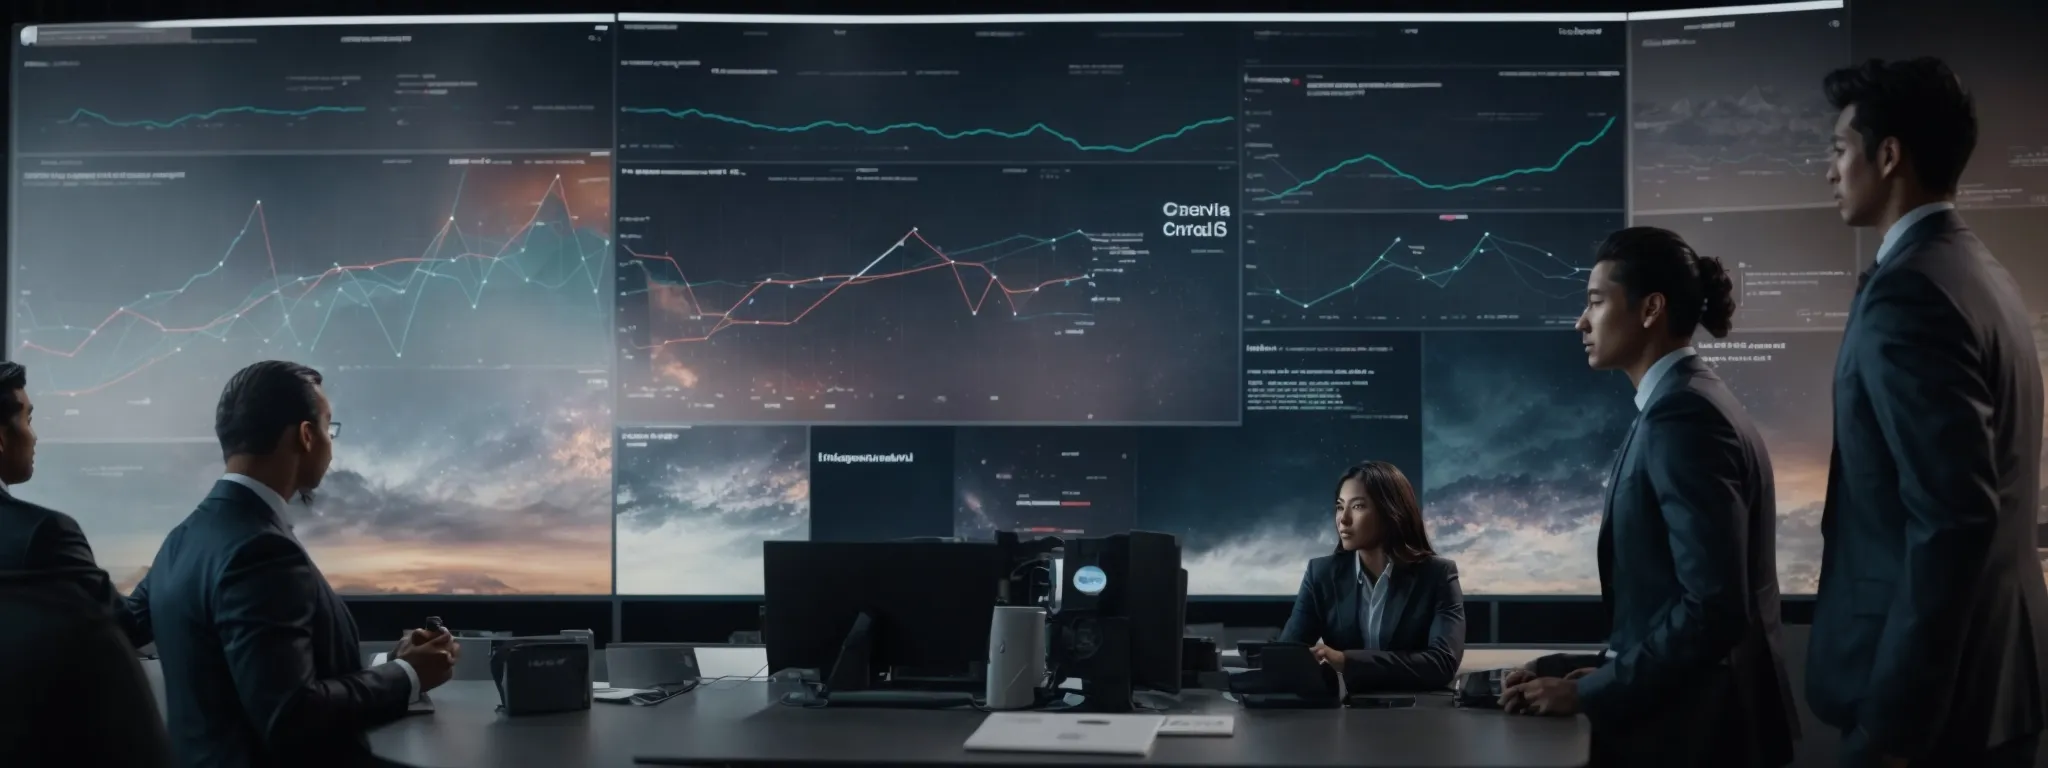 a diverse team of professionals collaborates around a large digital screen displaying performance analytics for a saas platform's multi-channel marketing campaign.